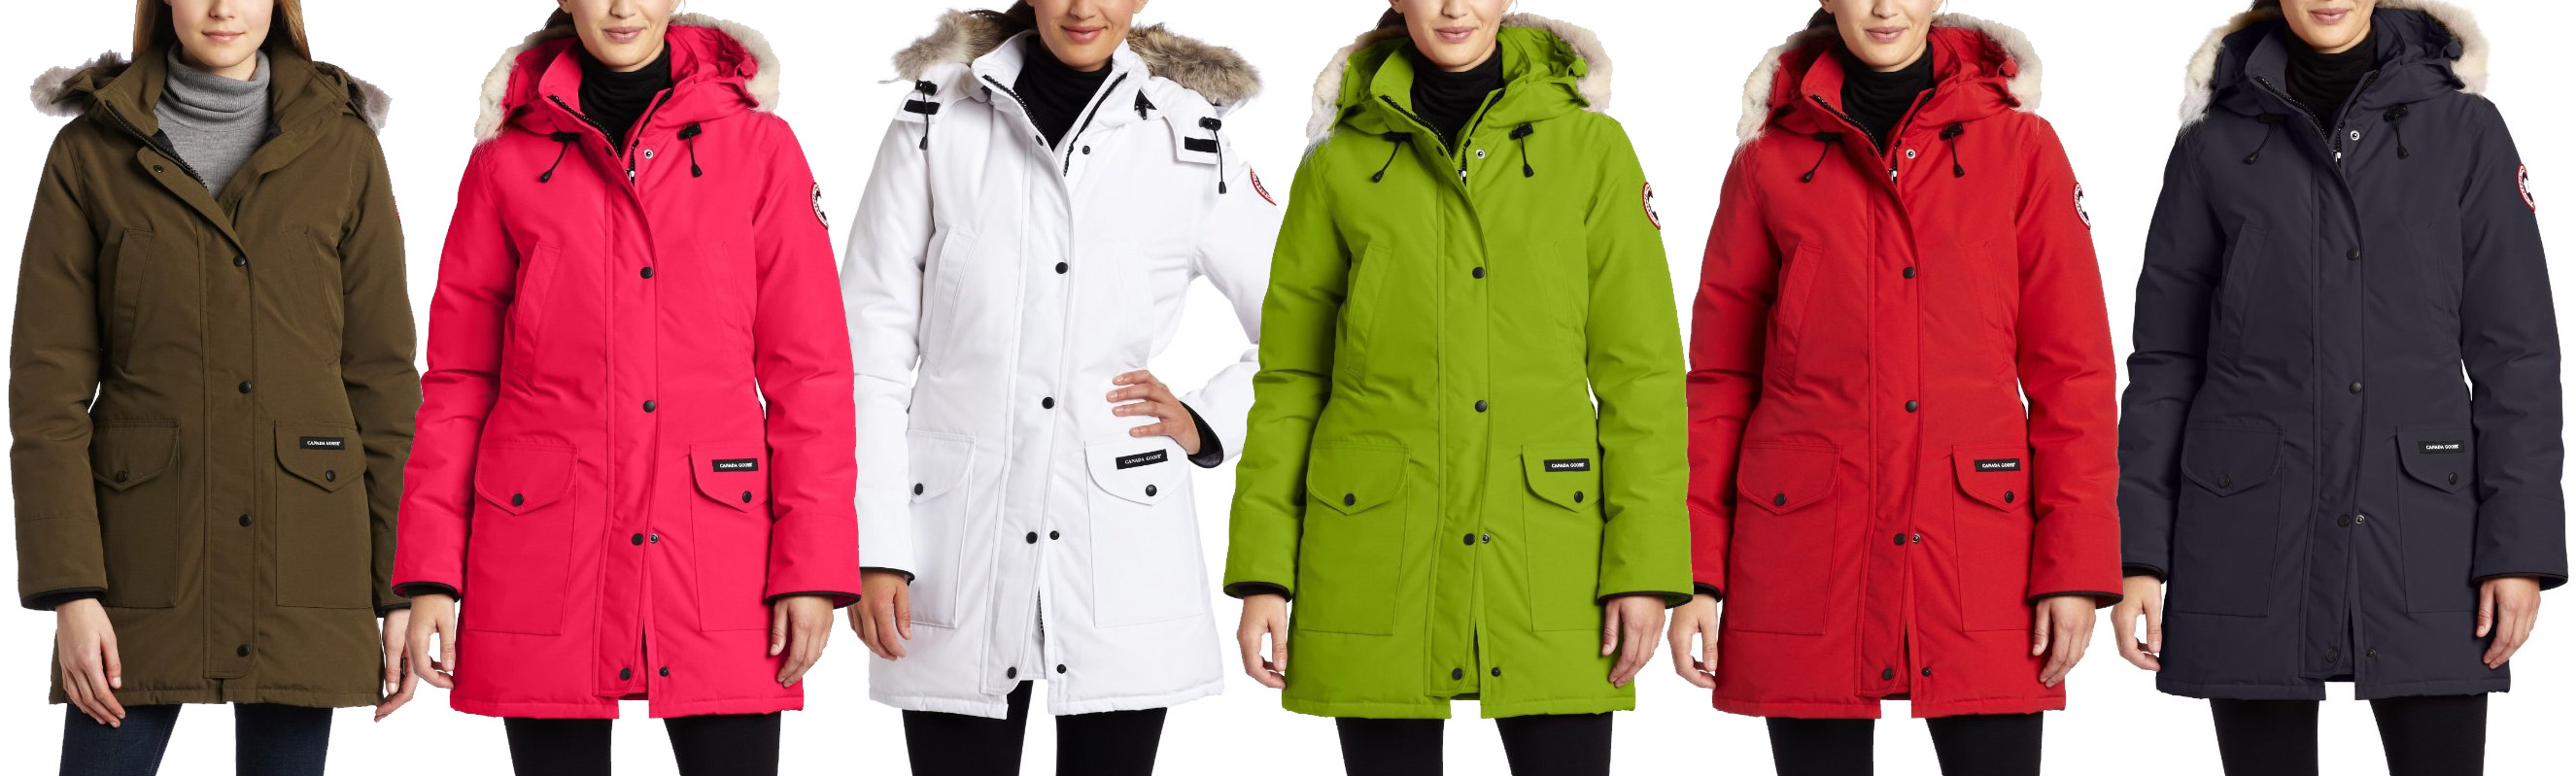 Canada Goose womens outlet store - Canada Goose Trillium Parka best winter Parka? - My Fashion Wants